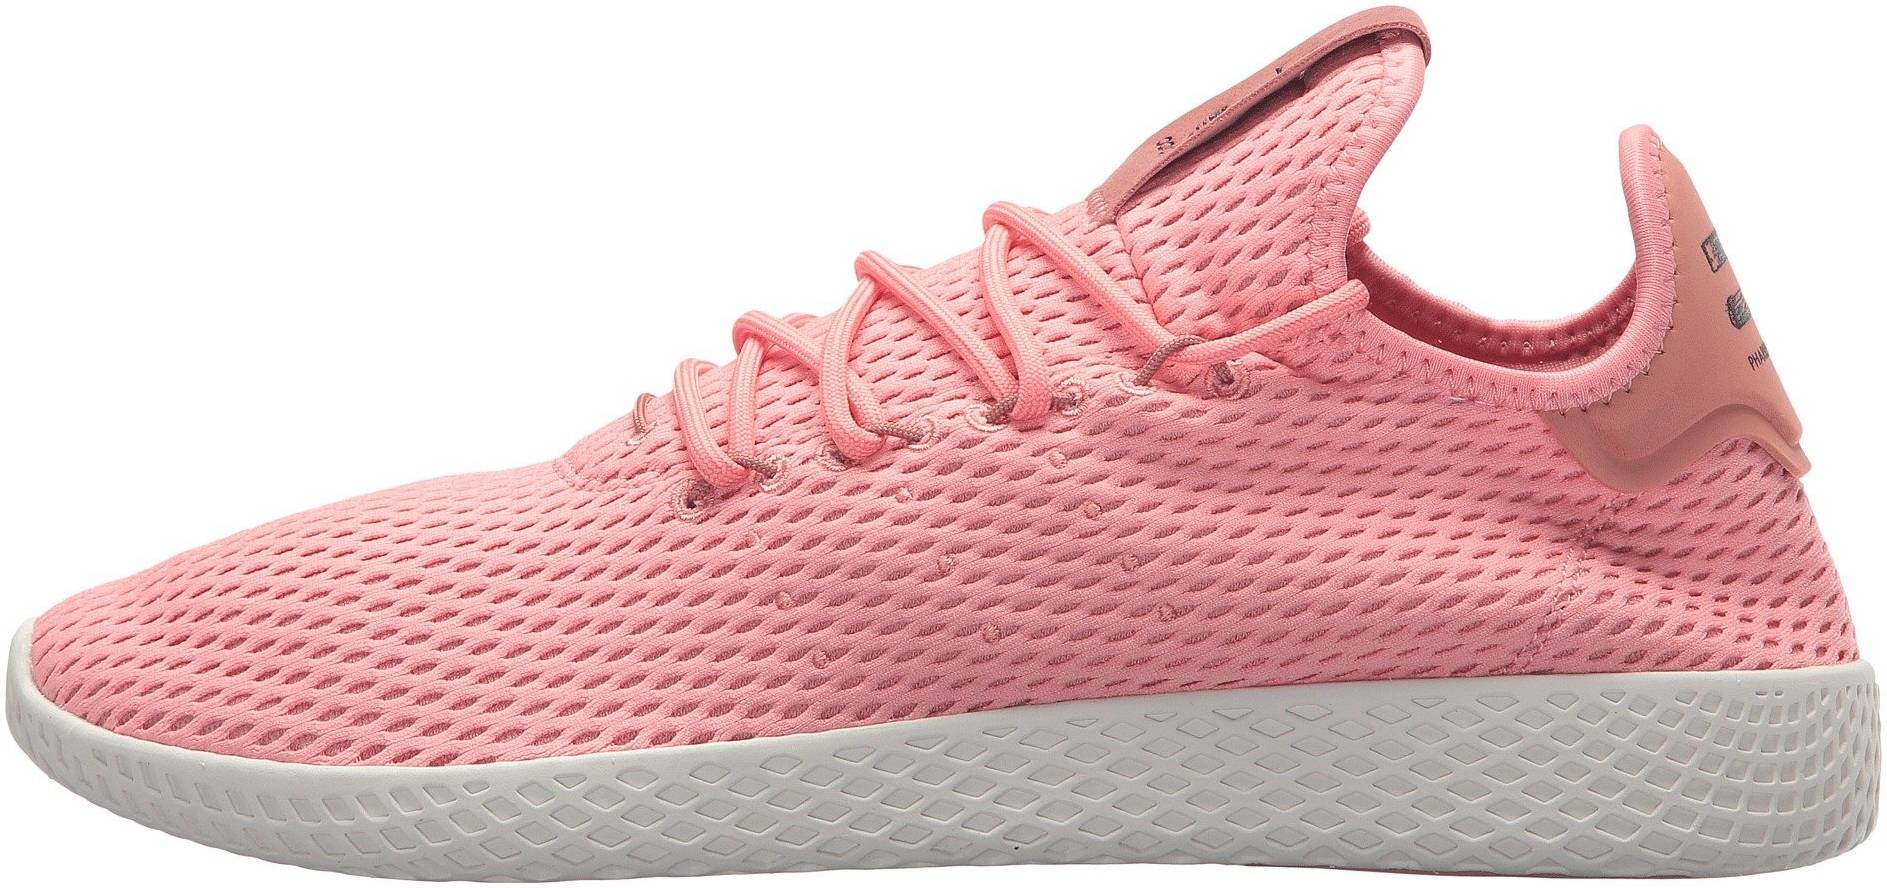 Save 61% on Adidas Sneakers (636 Models 